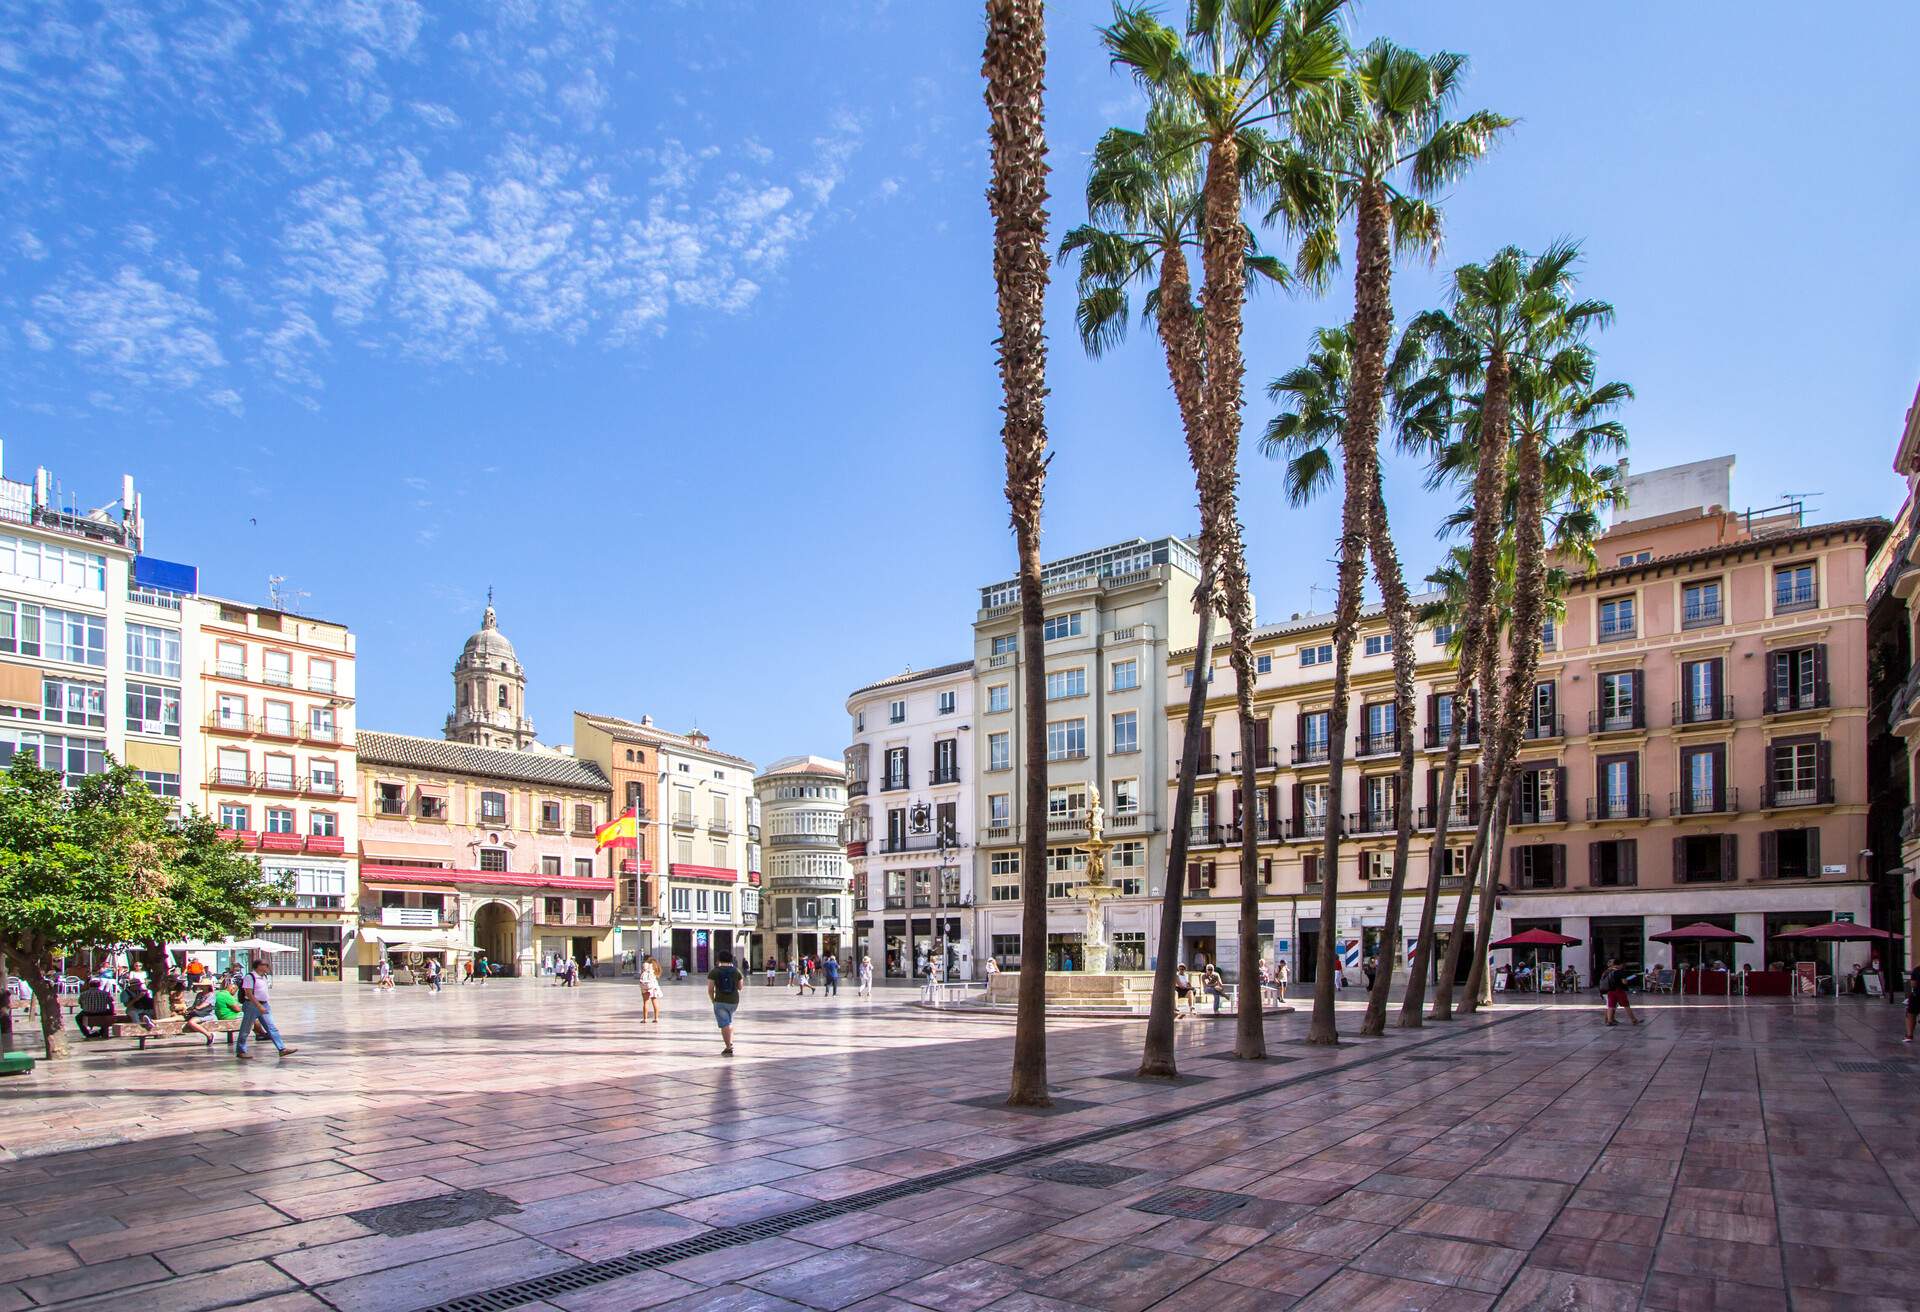 DEST_SPAIN_MALAGA_CONSTITUTION-SQUARE_GettyImages-1263633212